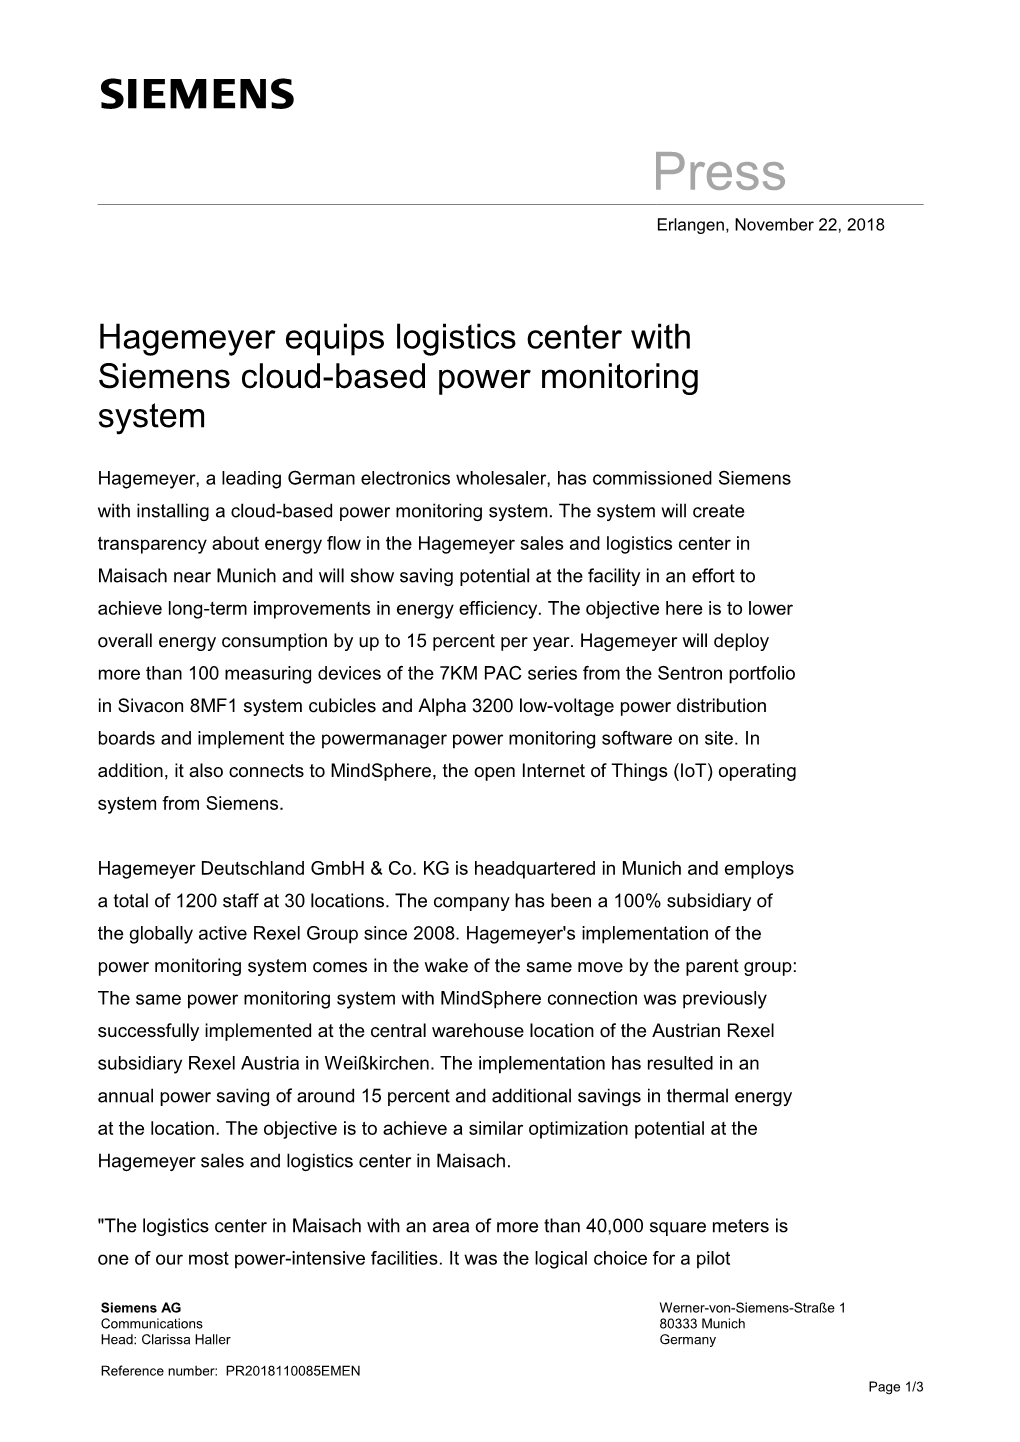 Hagemeyer Equips Logistics Center with Siemens Cloud-Based Power Monitoring System